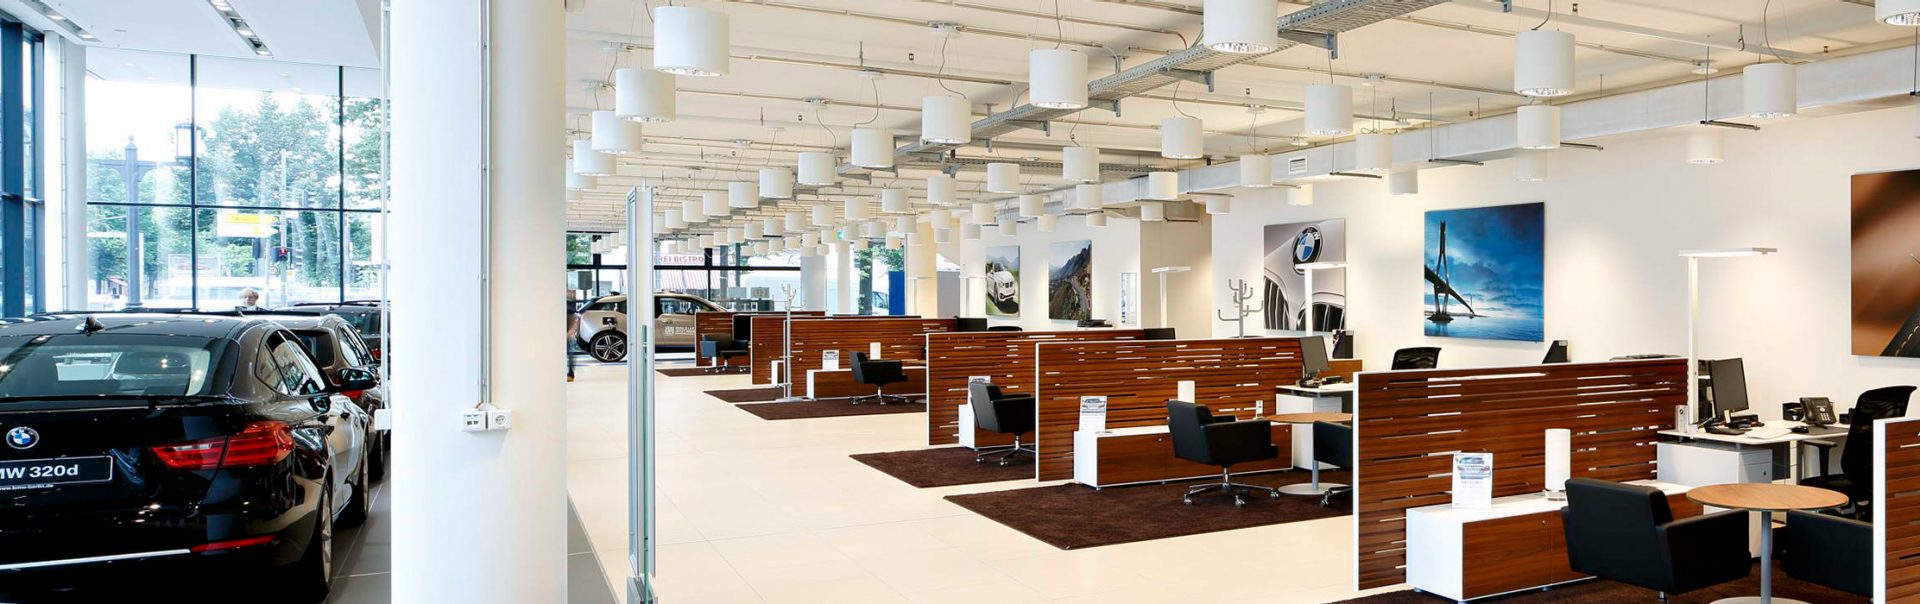 The picture shows the interior of the BMW dealership in Munich.